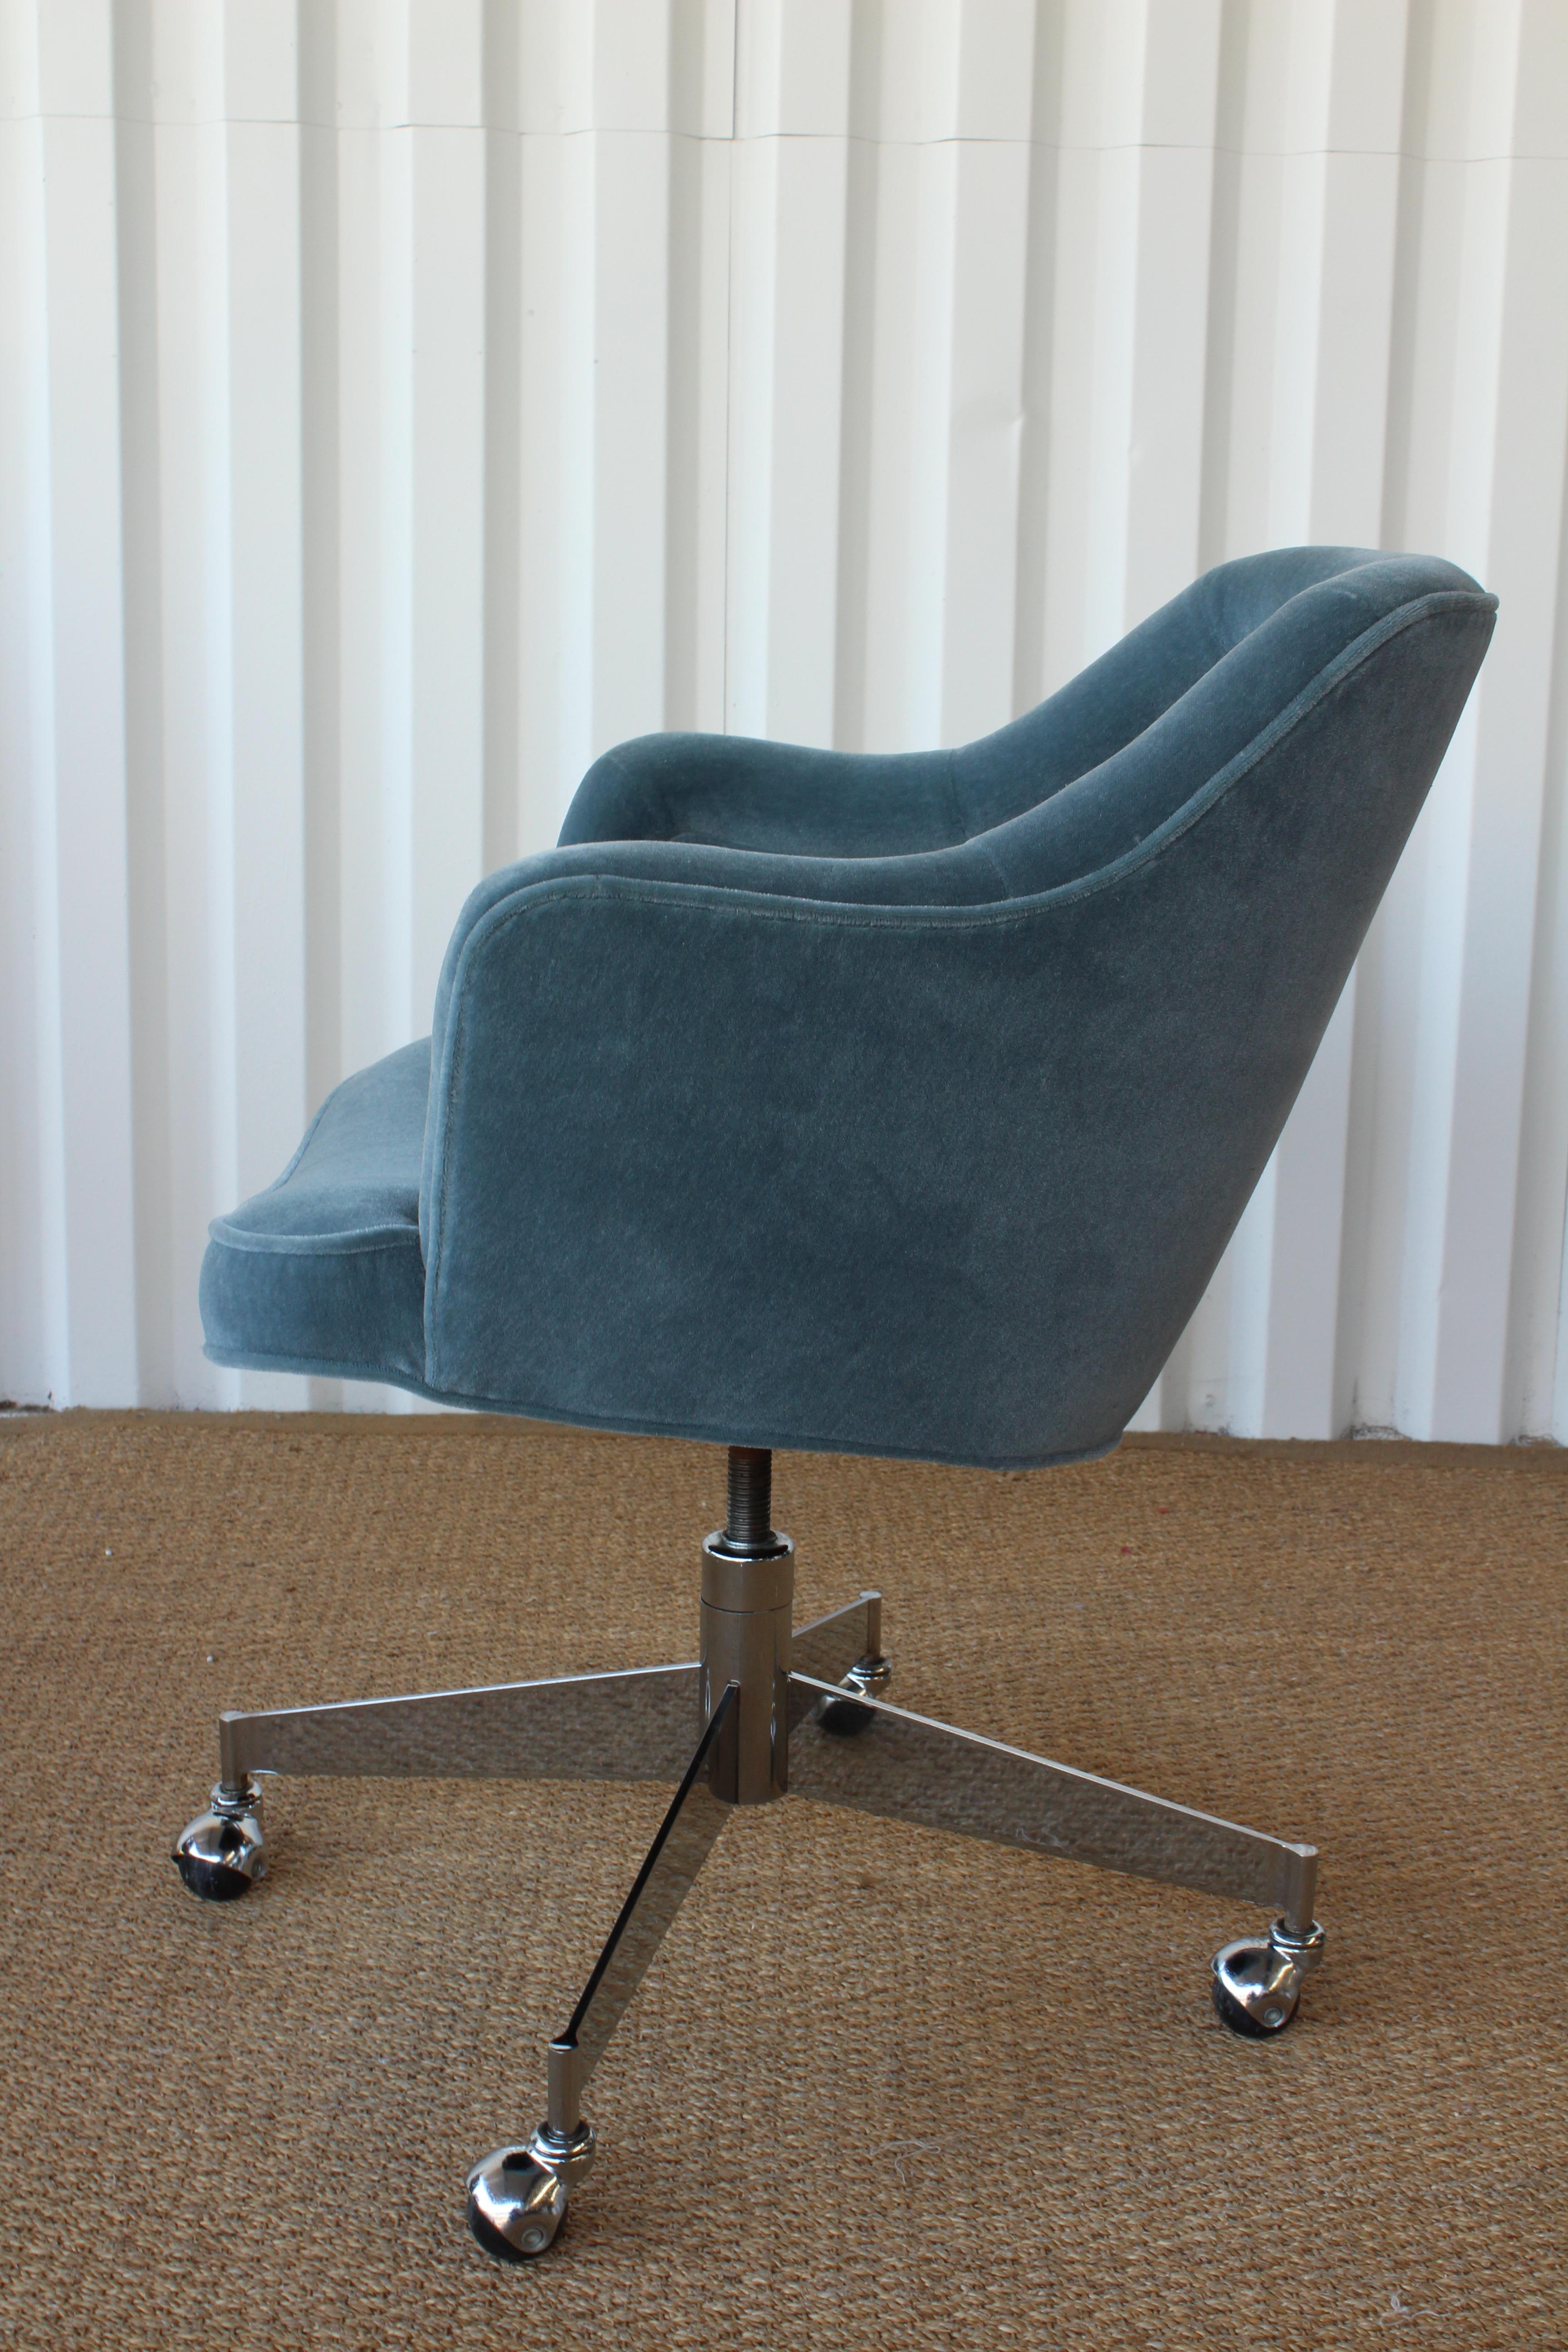 1960s desk chair newly uphoplstered in mohair fabric. Chrome-plated steel base. Minor oxidation on the base.